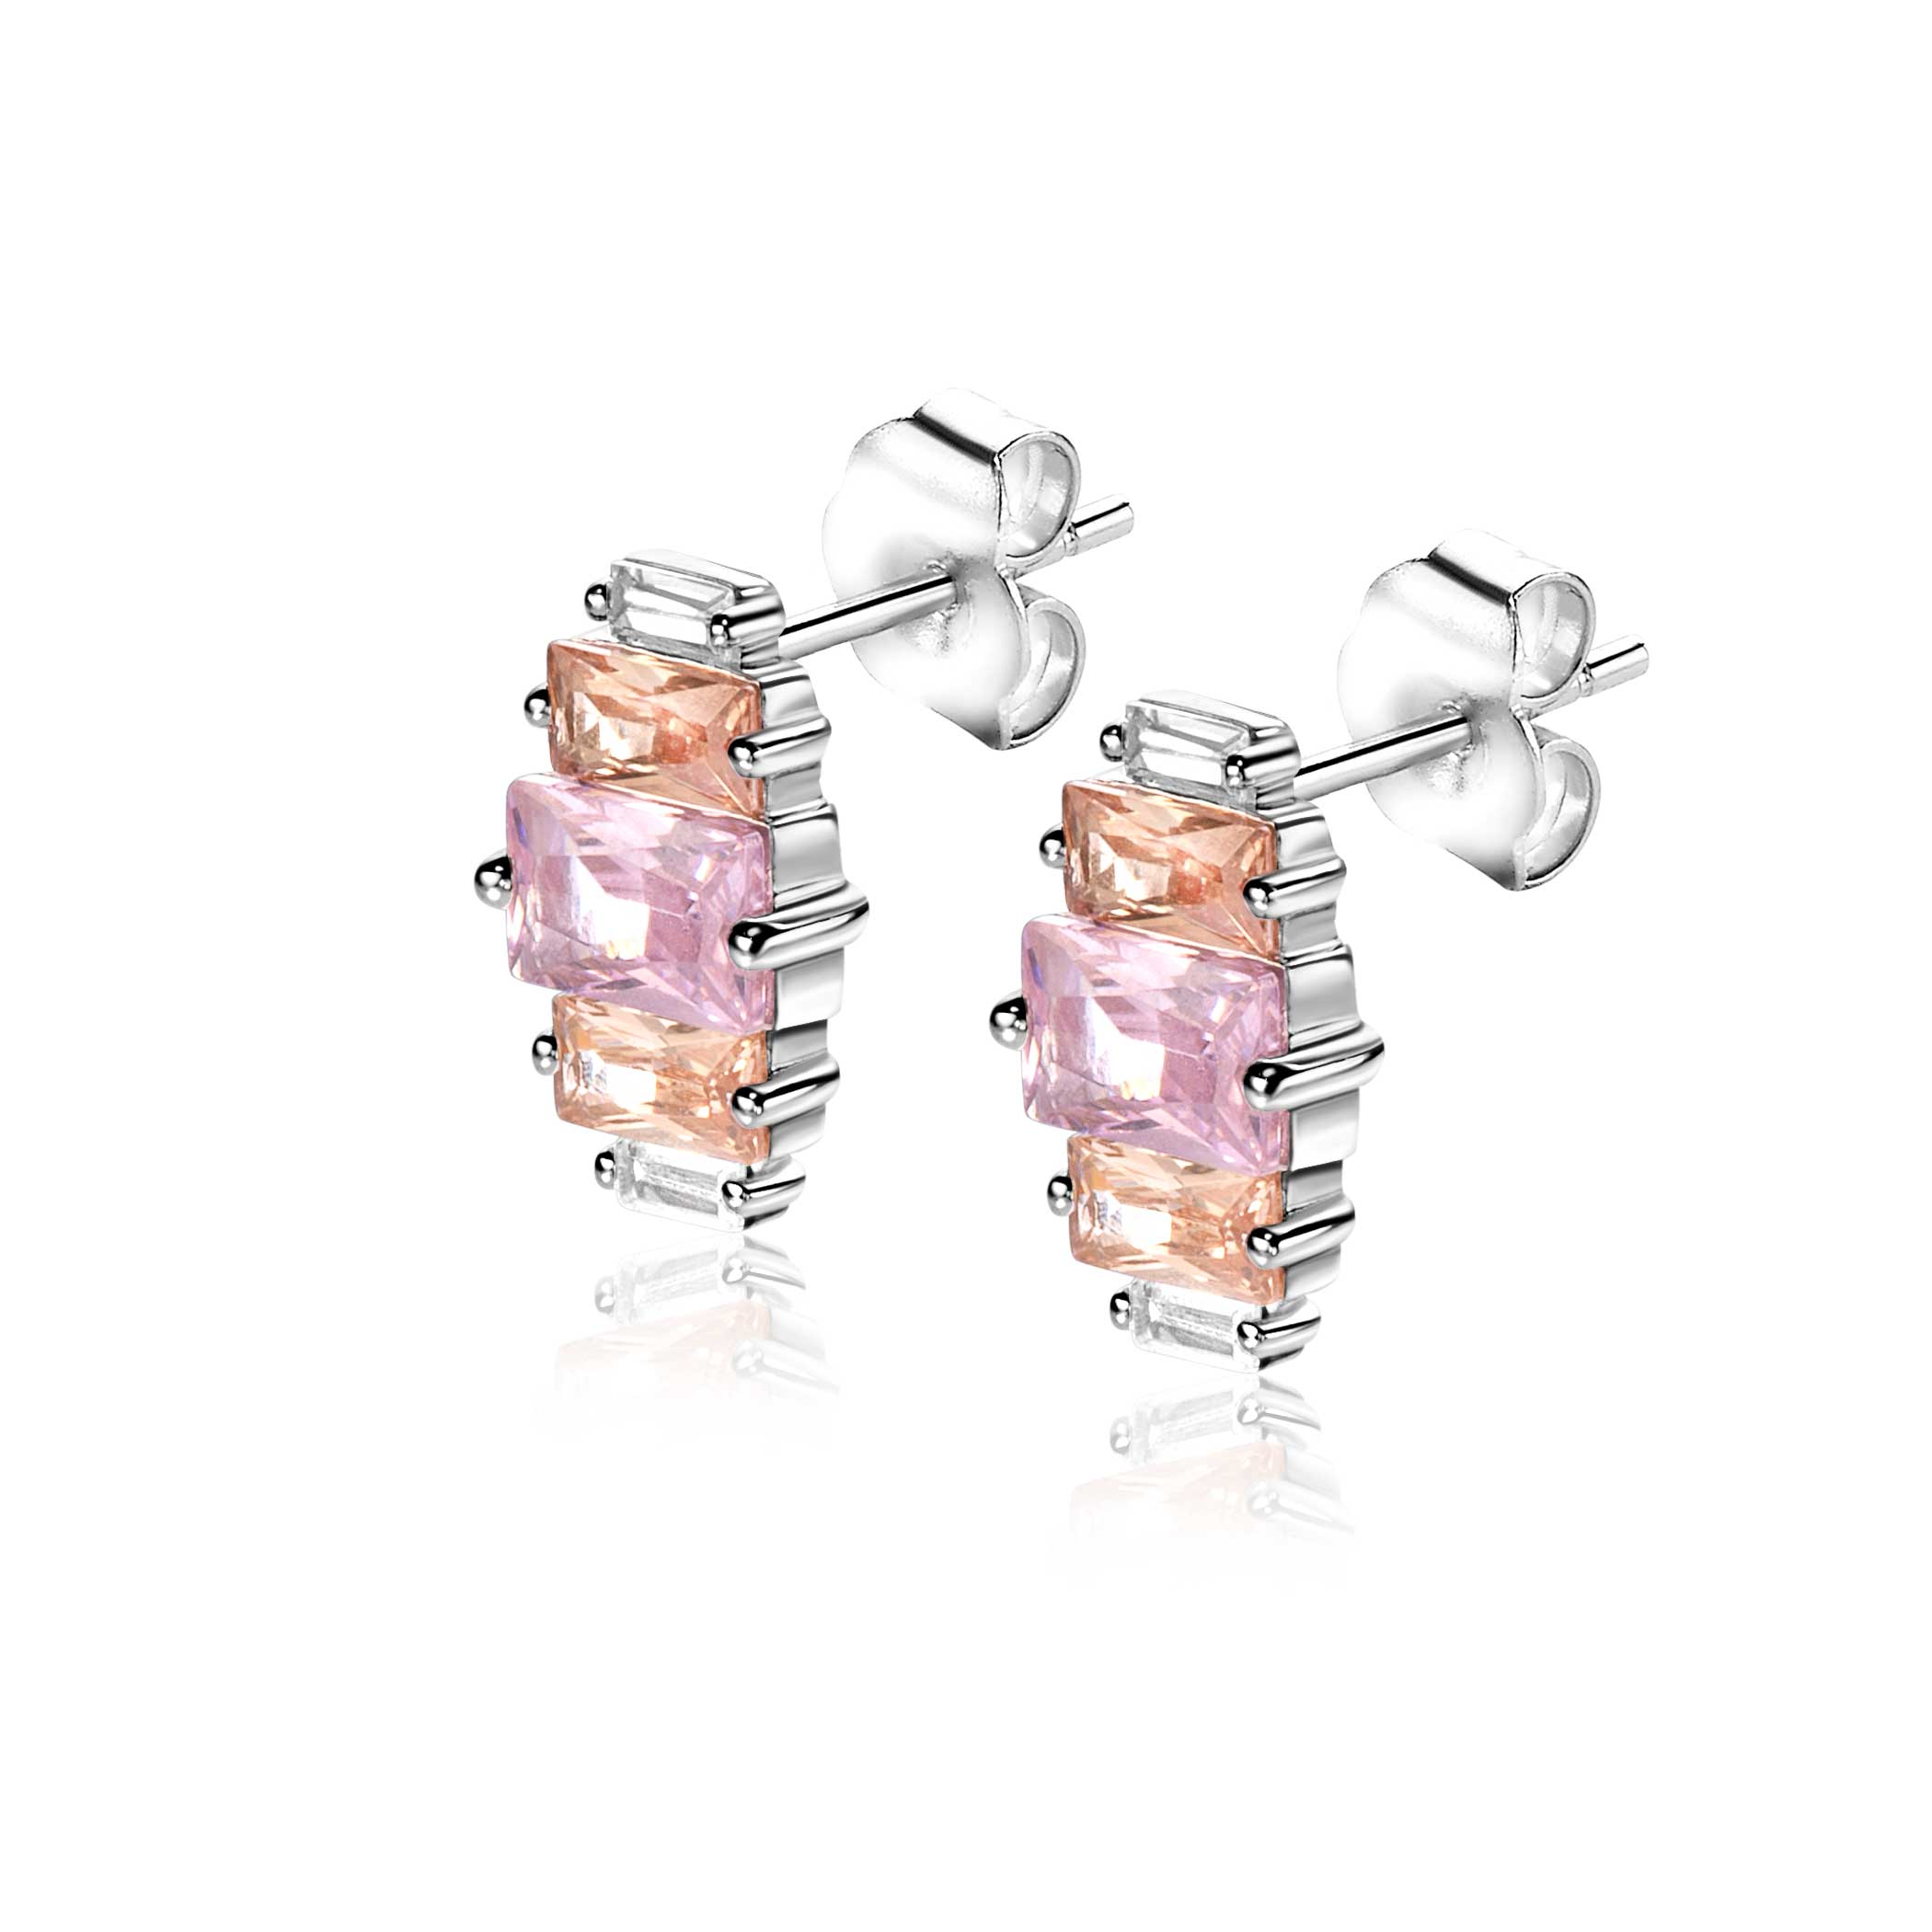 13mm ZINZI Sterling Silver Stud Earrings Baguette White Zirconia, Champagne and Pink ZIO2490